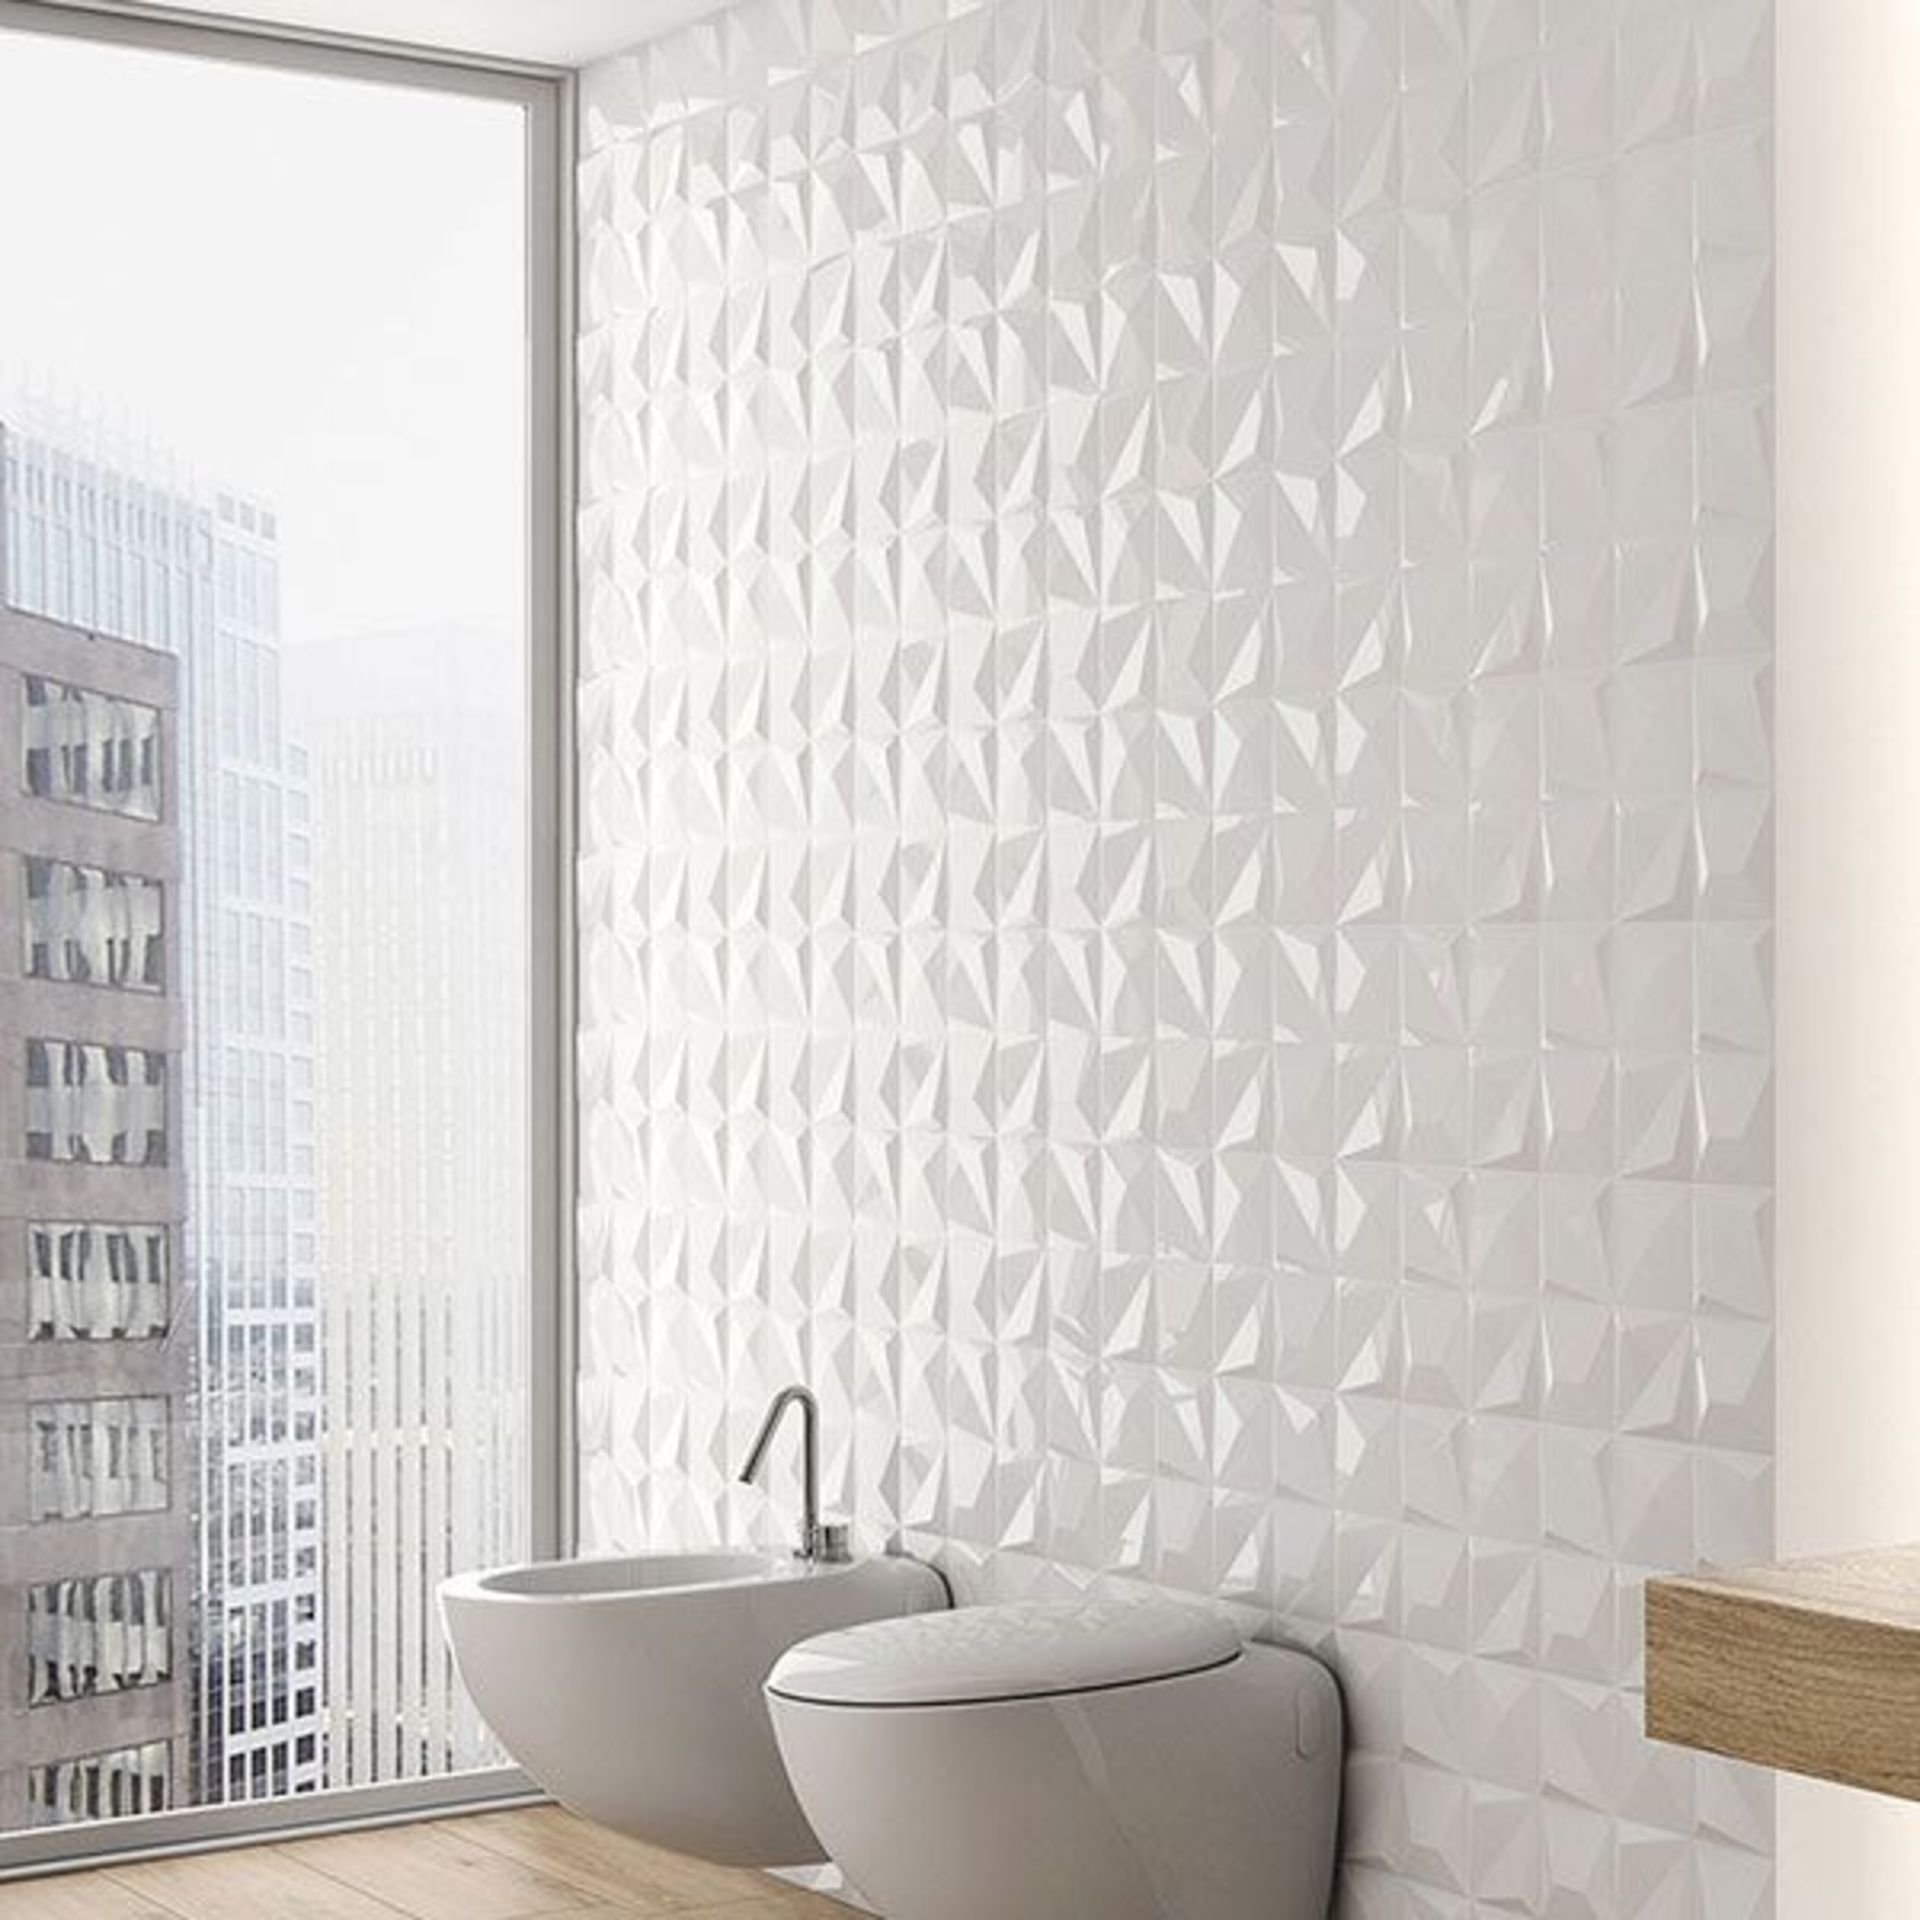 8.55 Square Meters of 3D White Star Effect Wall and Floor Tiles.300x600mm per tile.8mm Thick.In